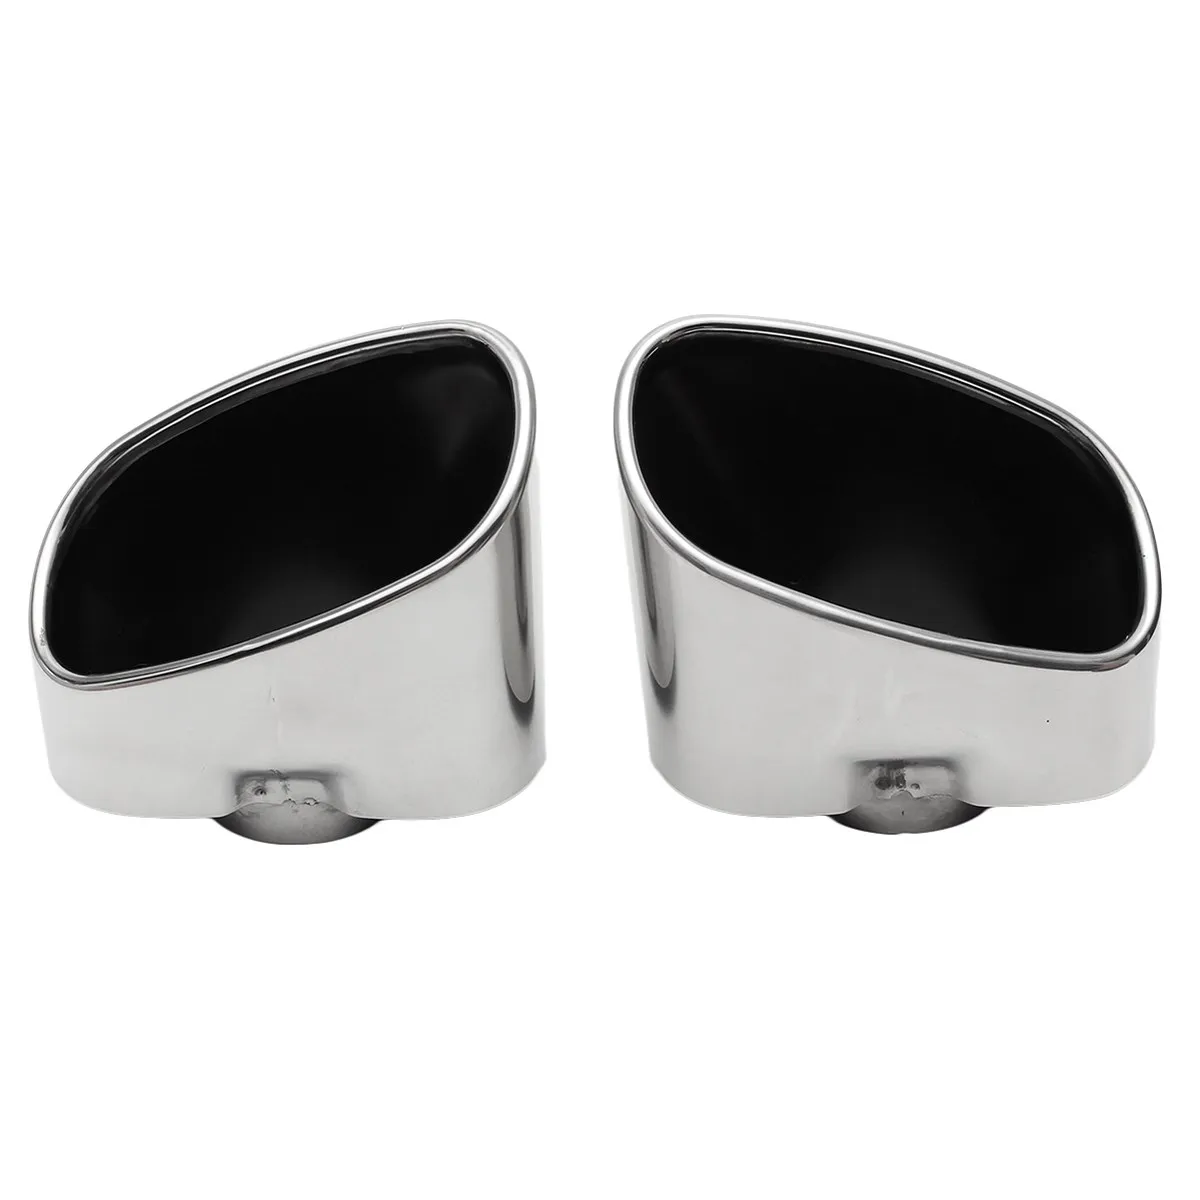 

For BMW X5 E70 2008 2009 2010 2011 2012 2013 Pair Chrome Exhaust Dual Tail Pipe Muffler Tip Stainless Steelauto accessories